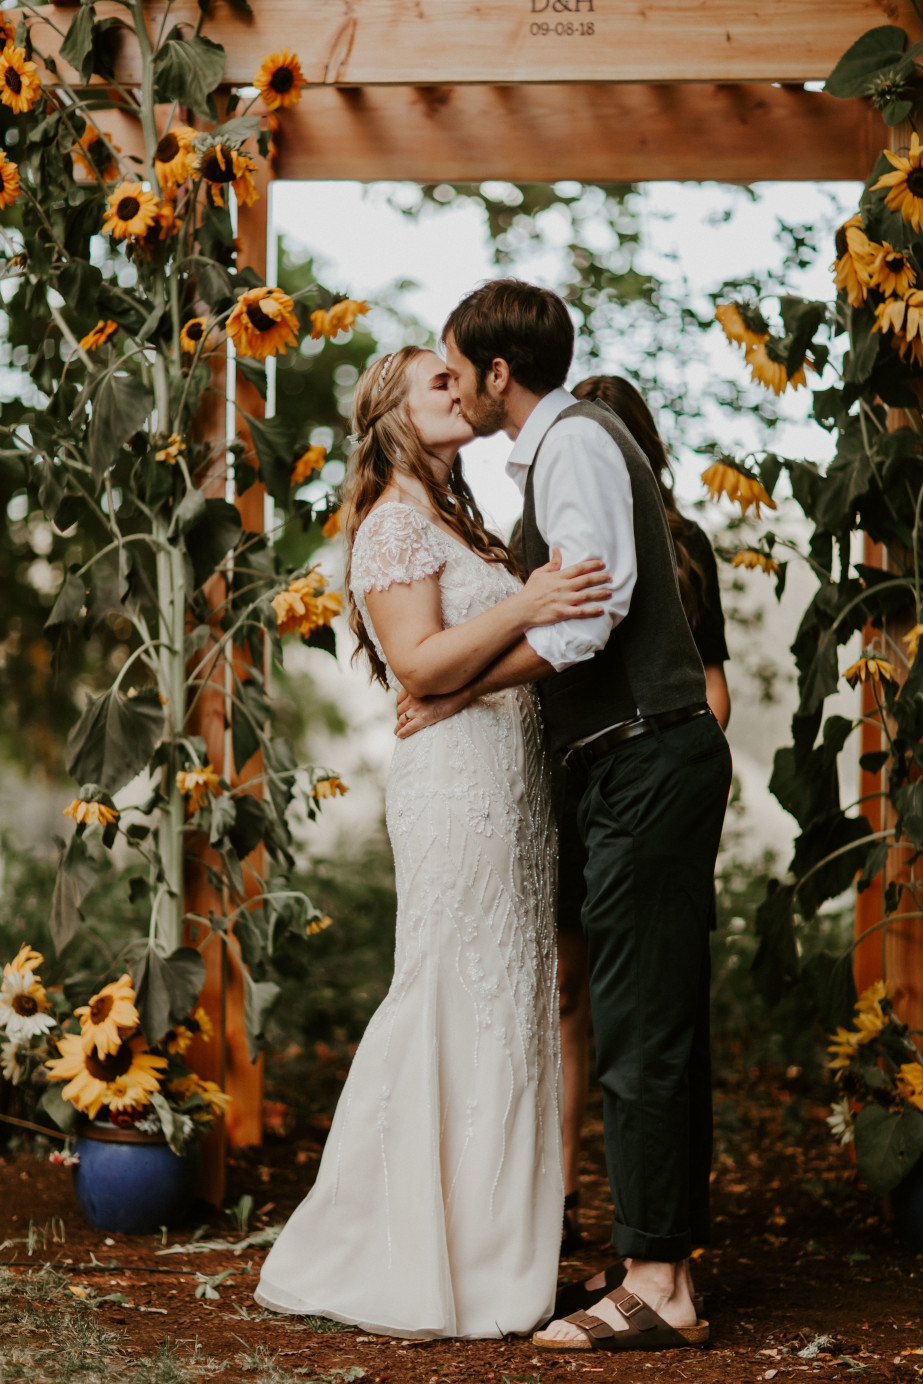 Hannah and Dan kiss at the altar in Corvallis, Oregon. Intimate wedding photography in Corvallis Oregon by Sienna Plus Josh.